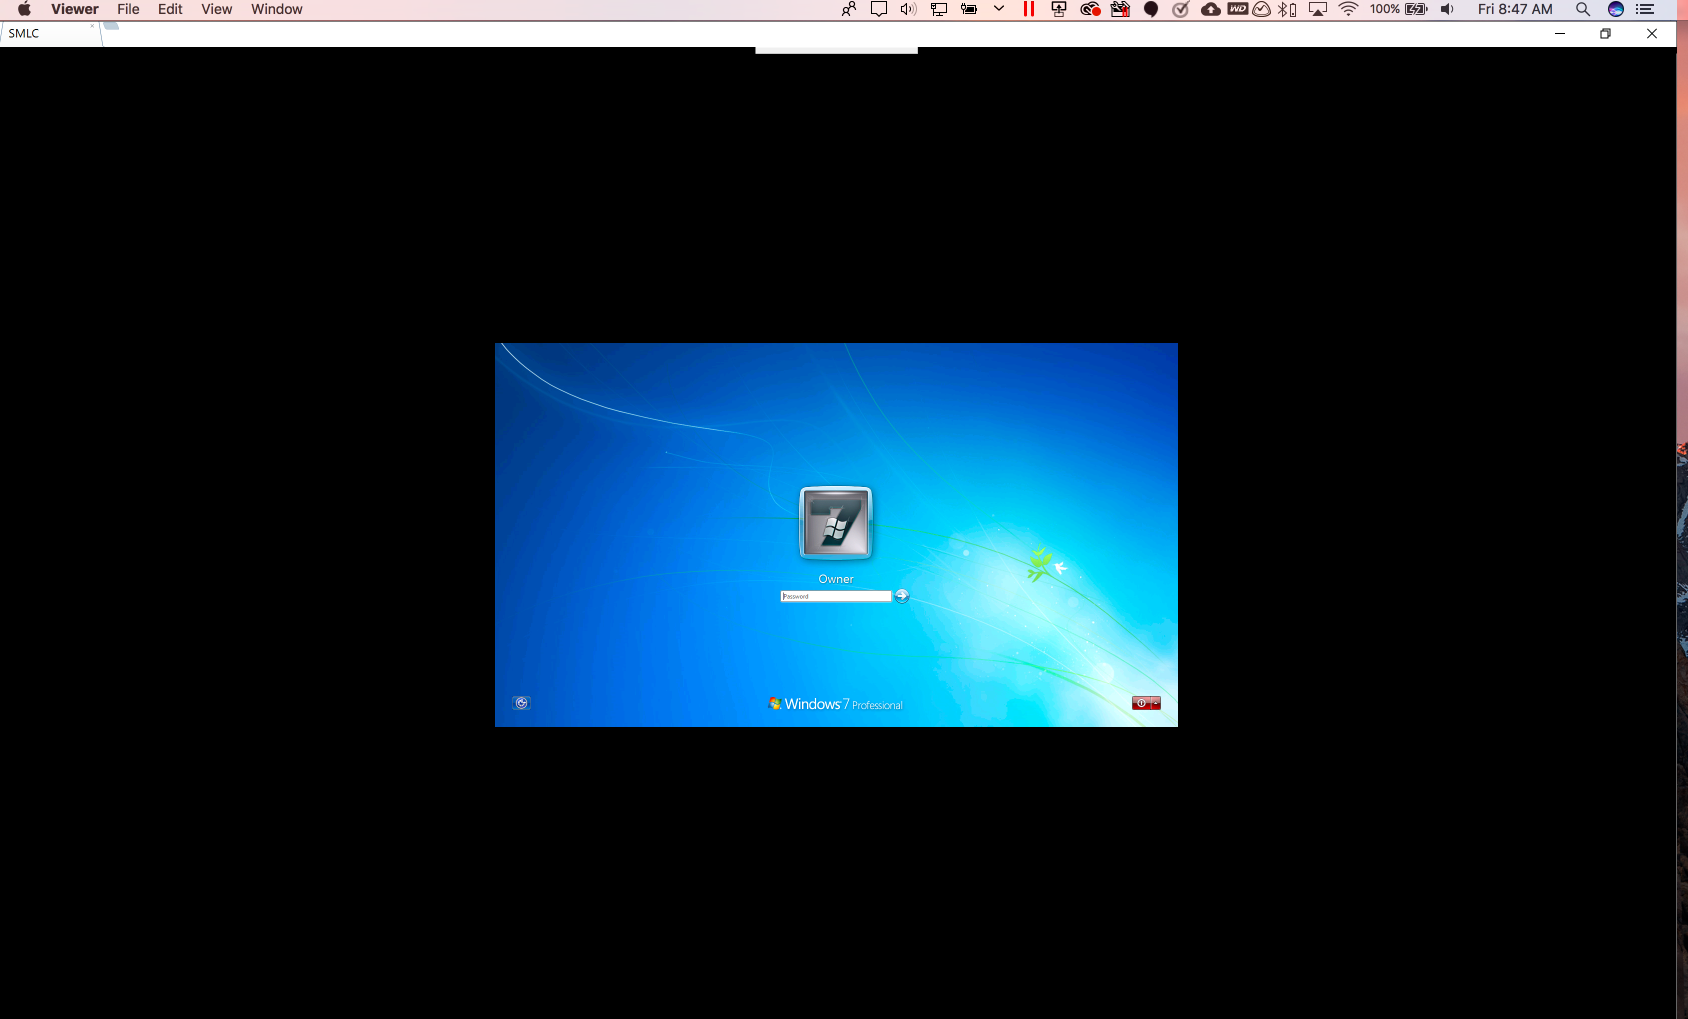 Remote Connection Window is Very Small